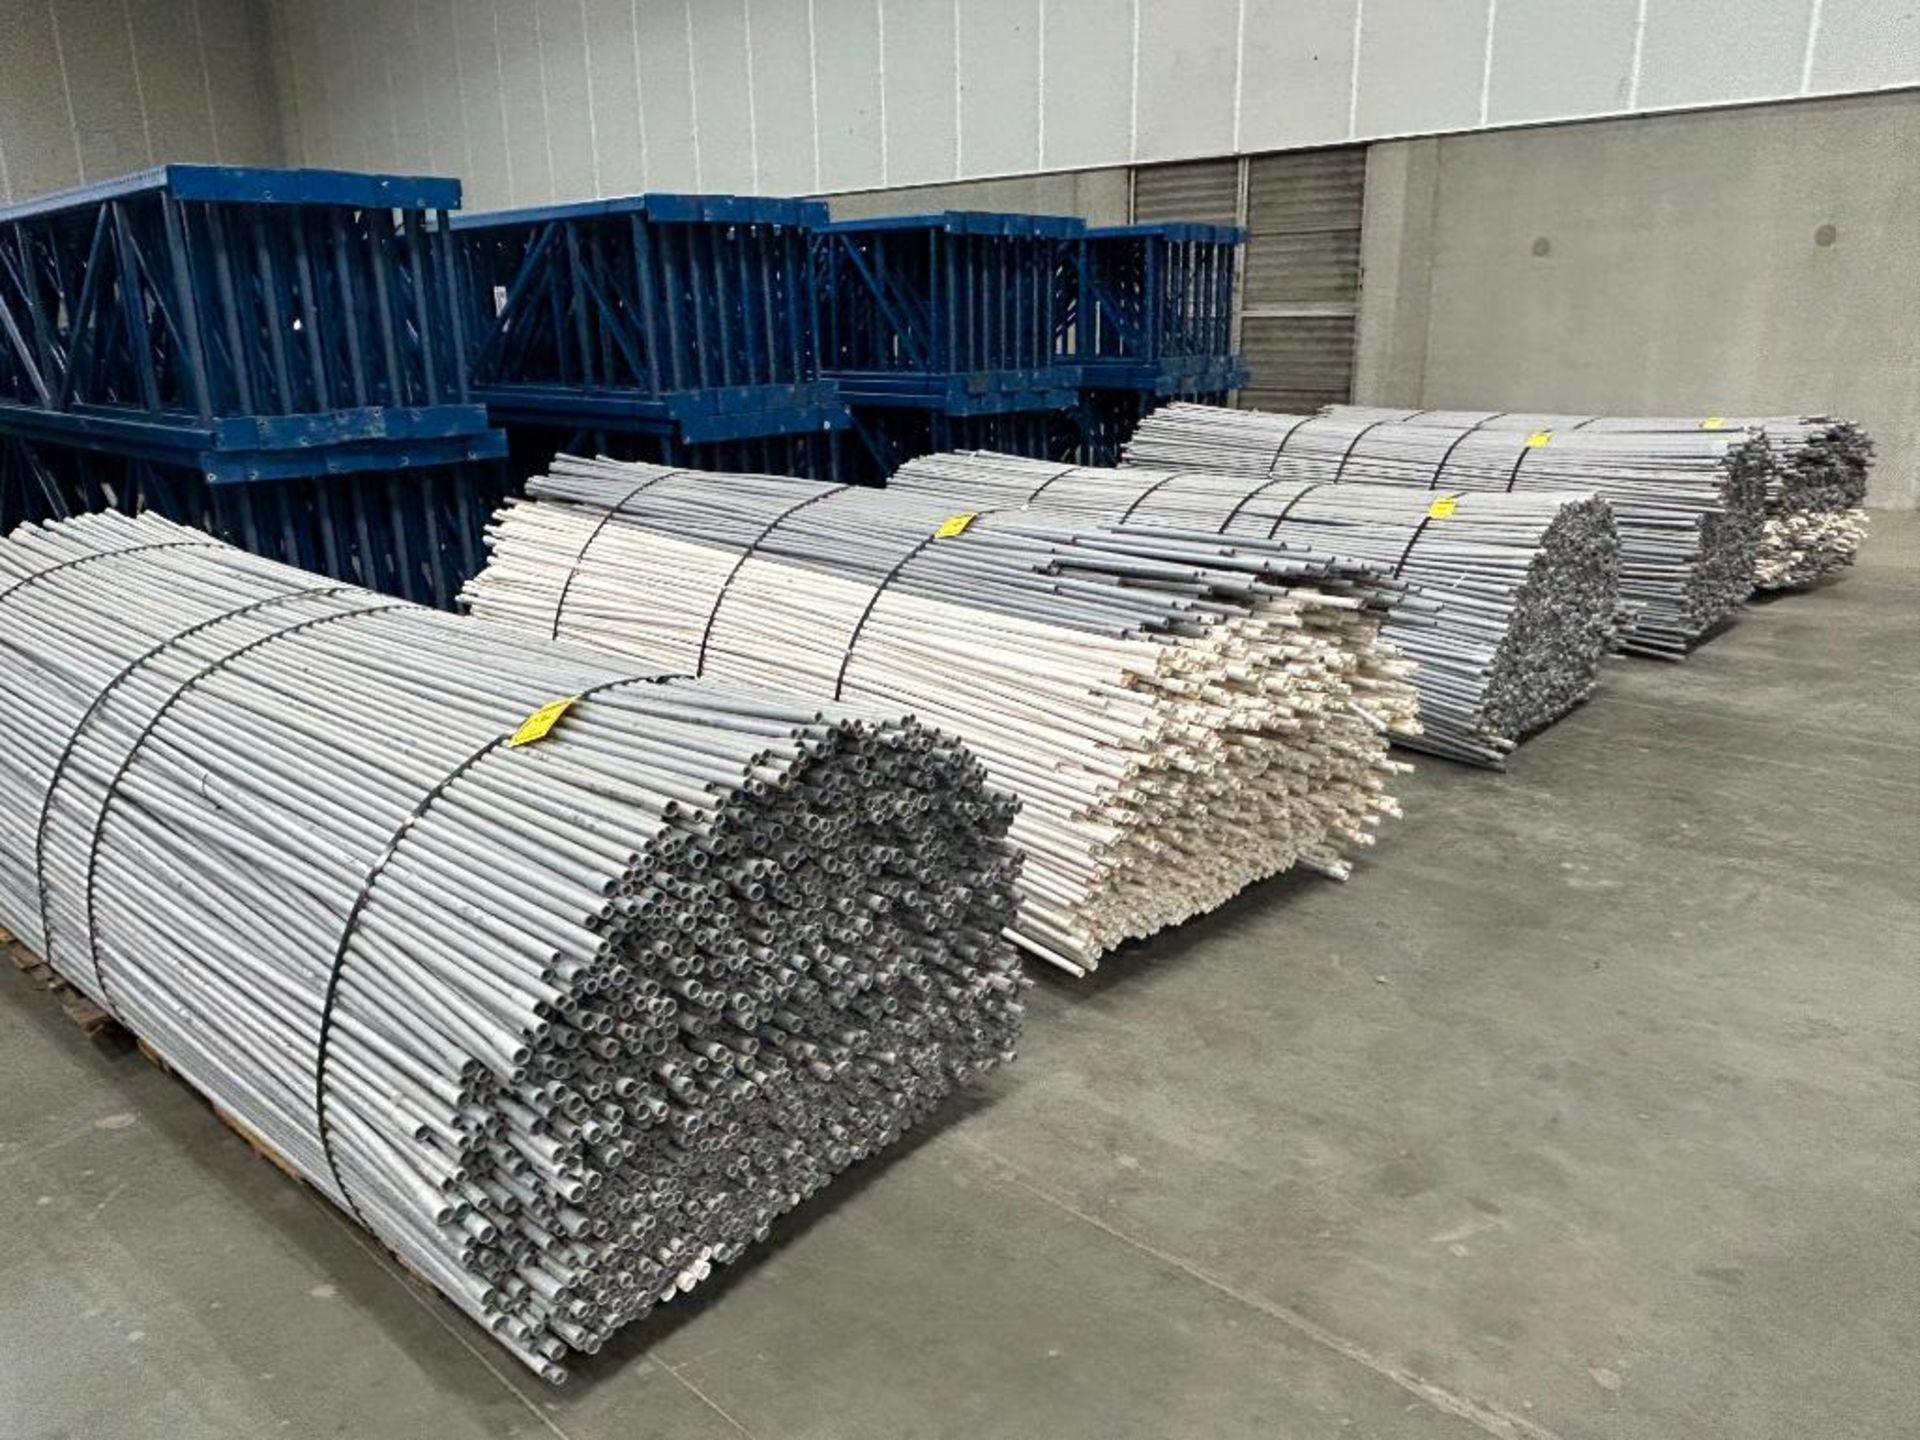 (5) Large Bundles of 1/2" X 10' PVC Conduit ($50 Loading Fee Will Be Added To Invoice)